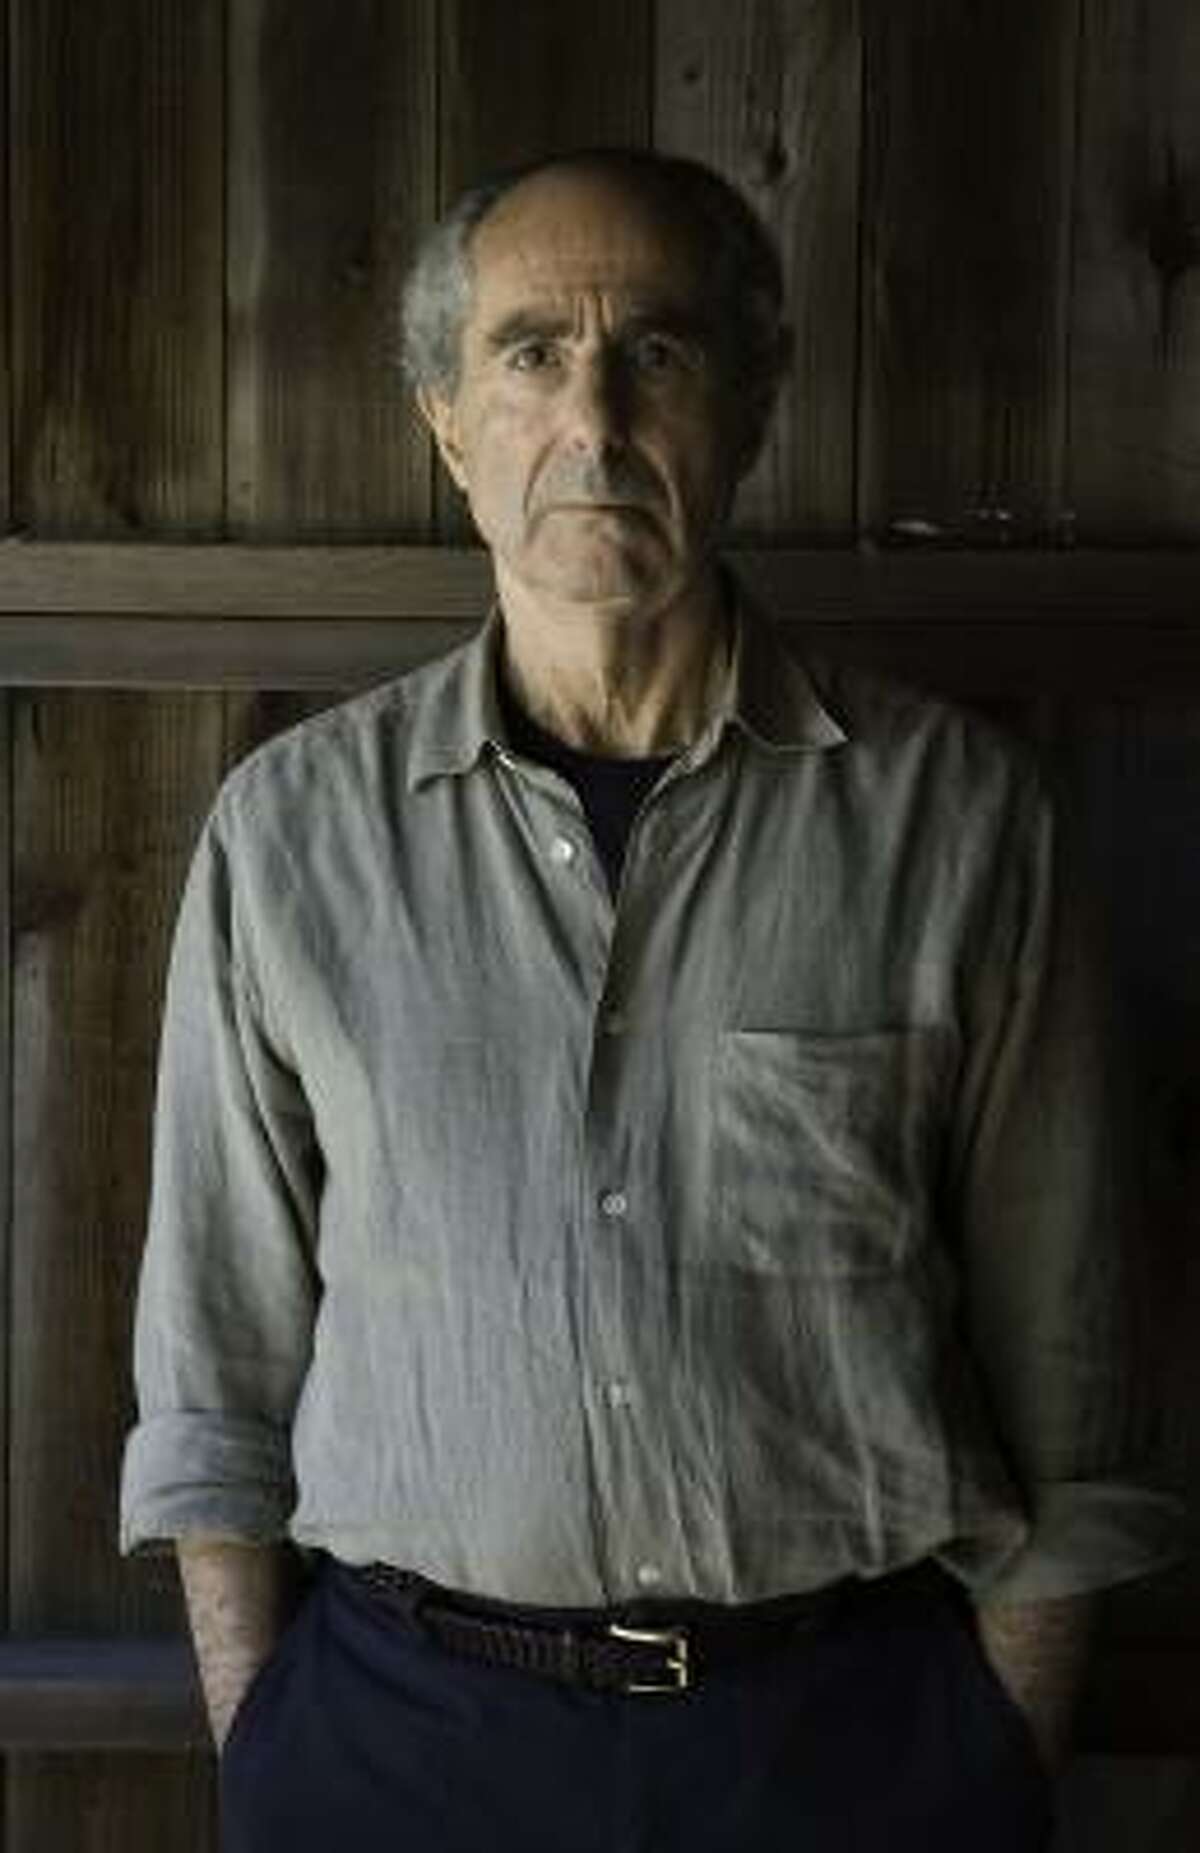 Novelist Philip Roth is 74 and has been writing about Nathan Zuckerman since the 1970s.